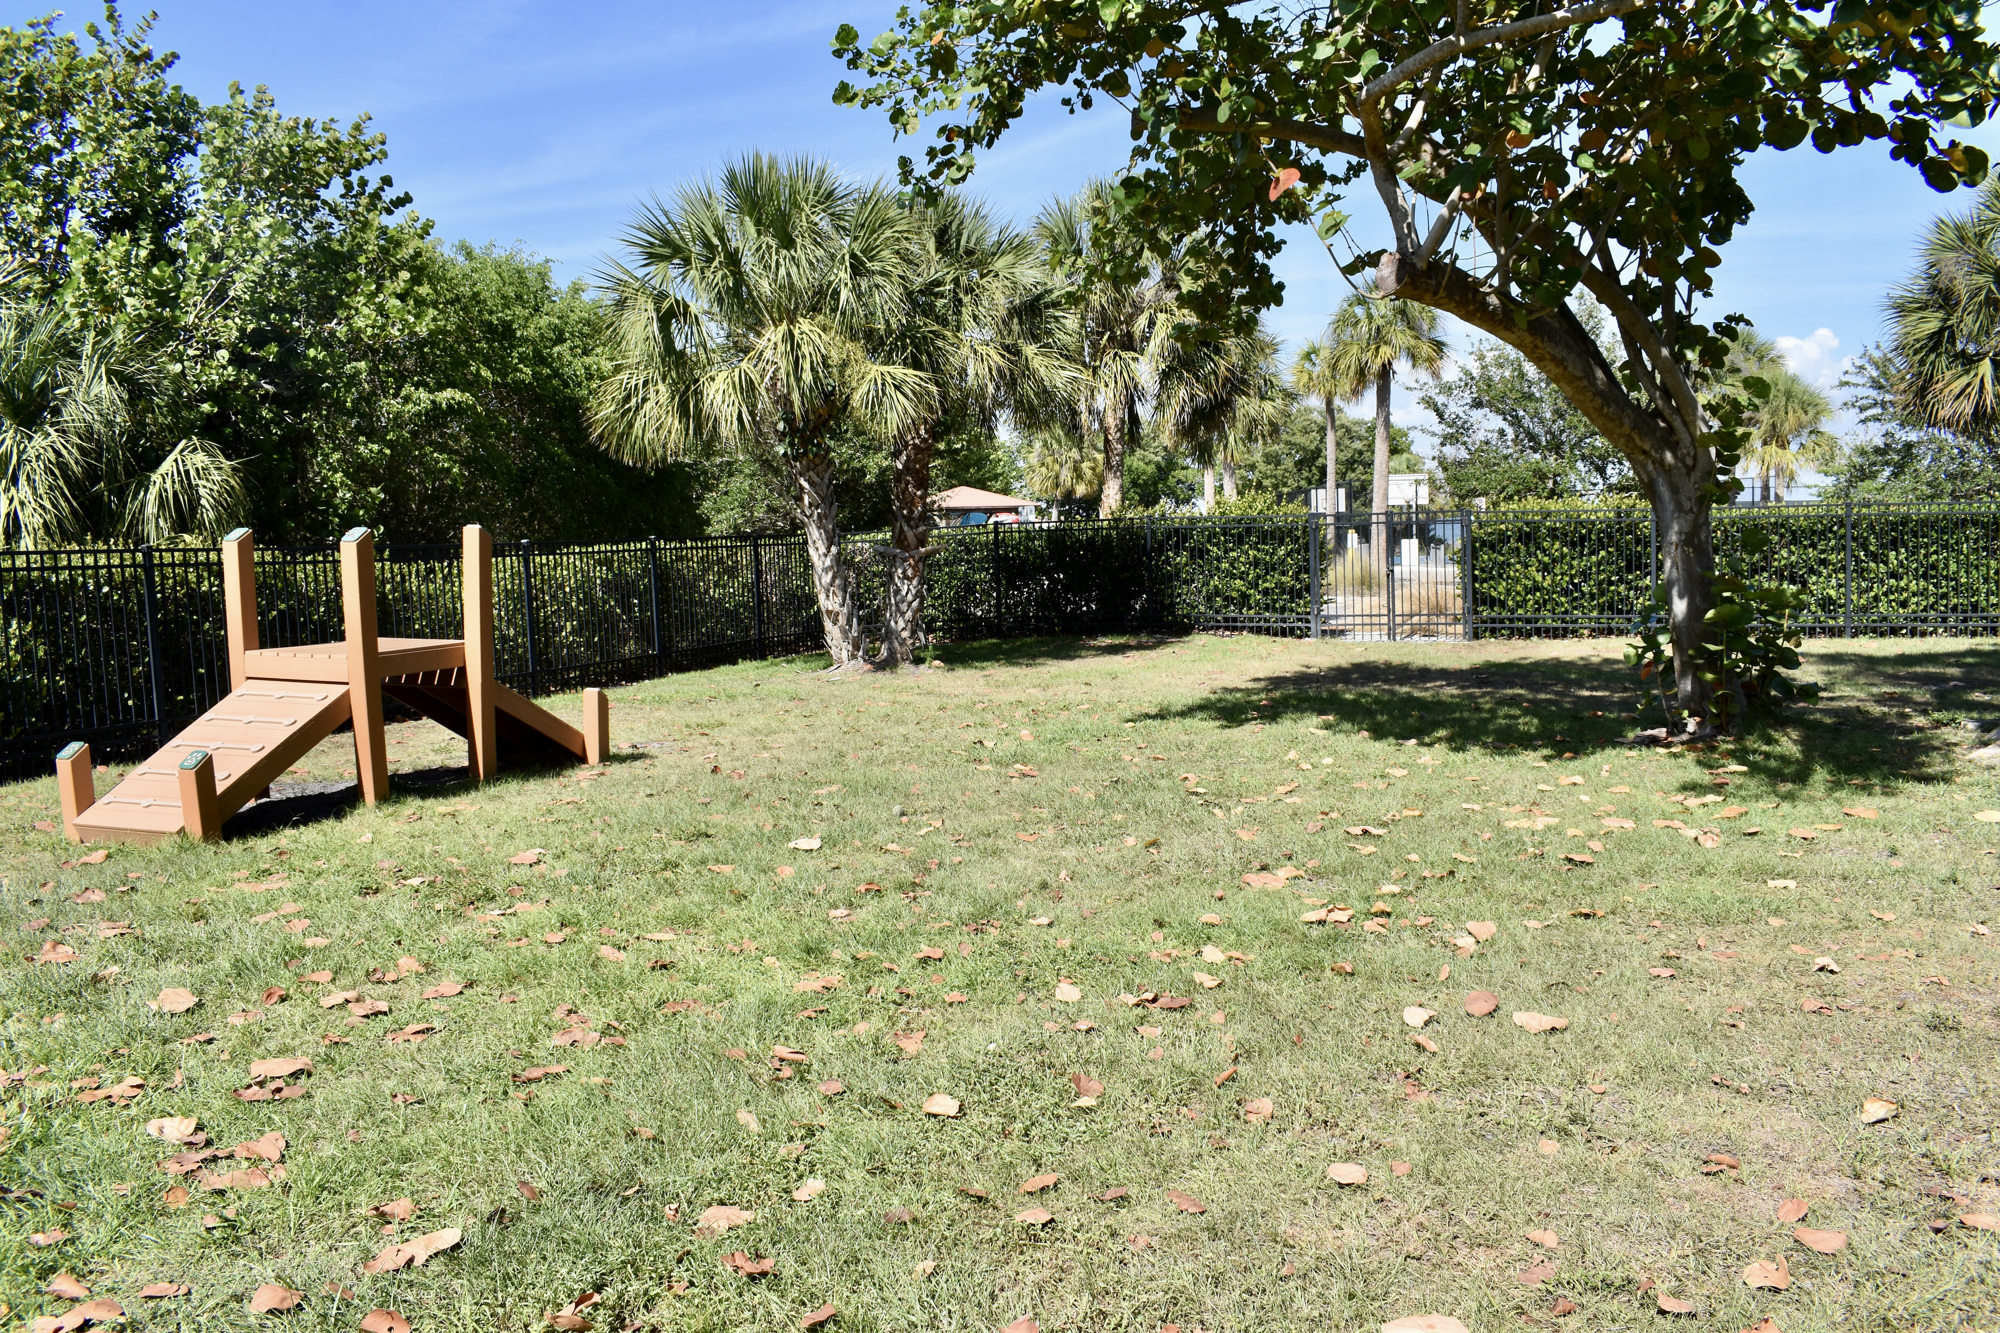 About a quarter of the dog park will remain with natural grass, which has thrived in areas of sunshine.